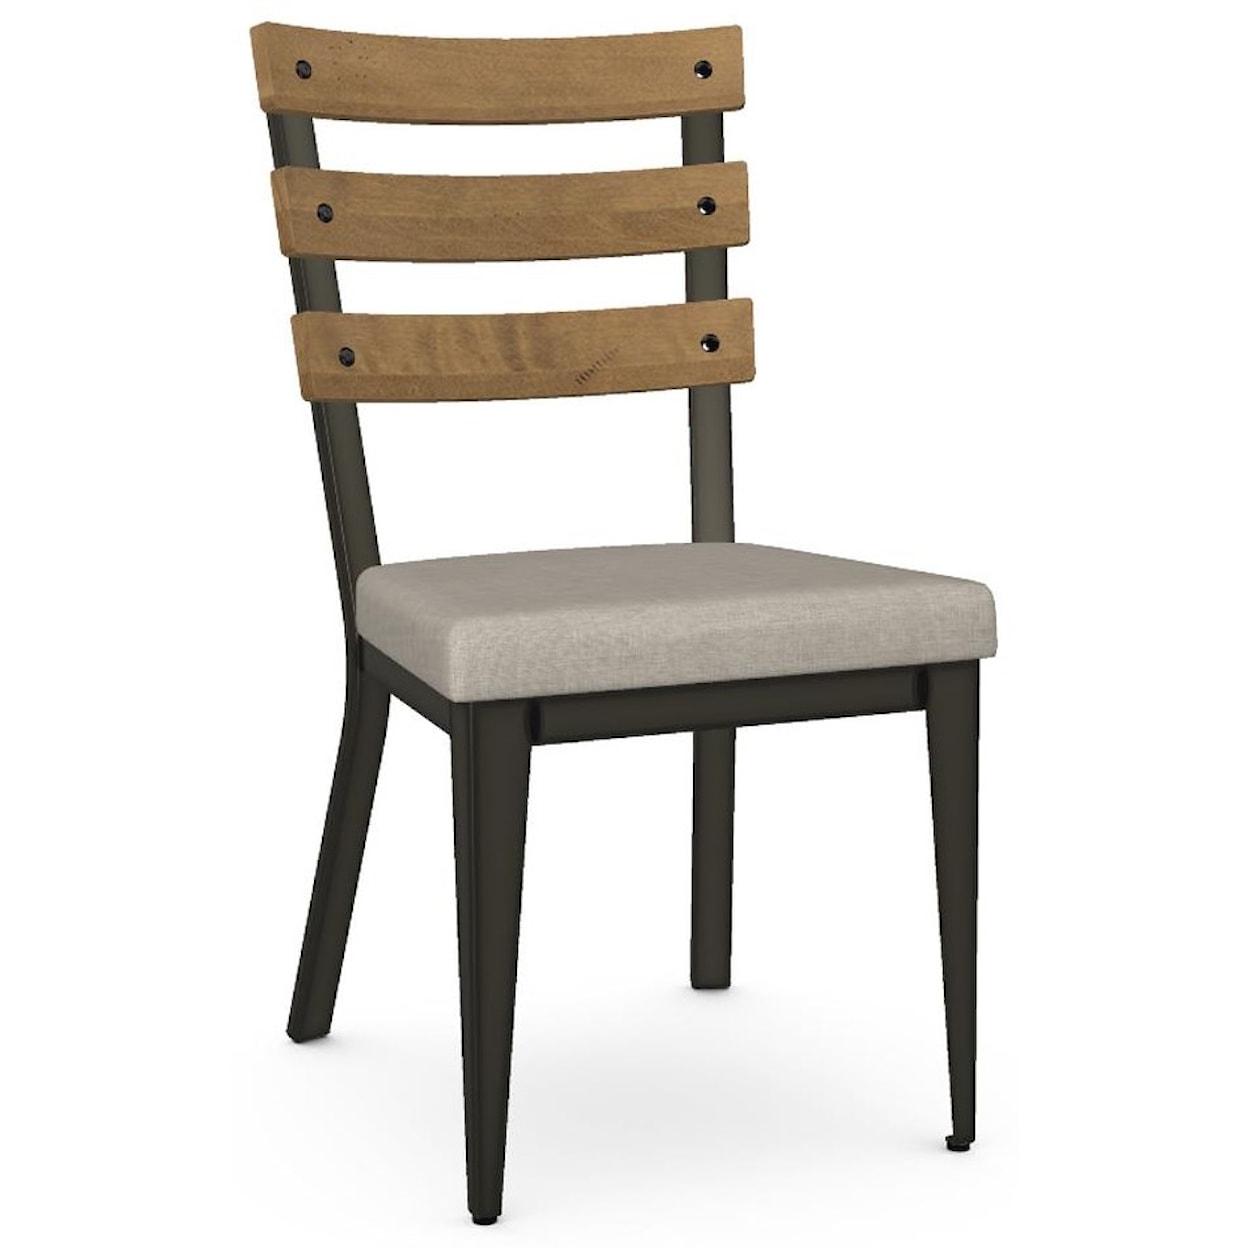 Amisco Industrial Dexter Chair with  Upholstered Seat